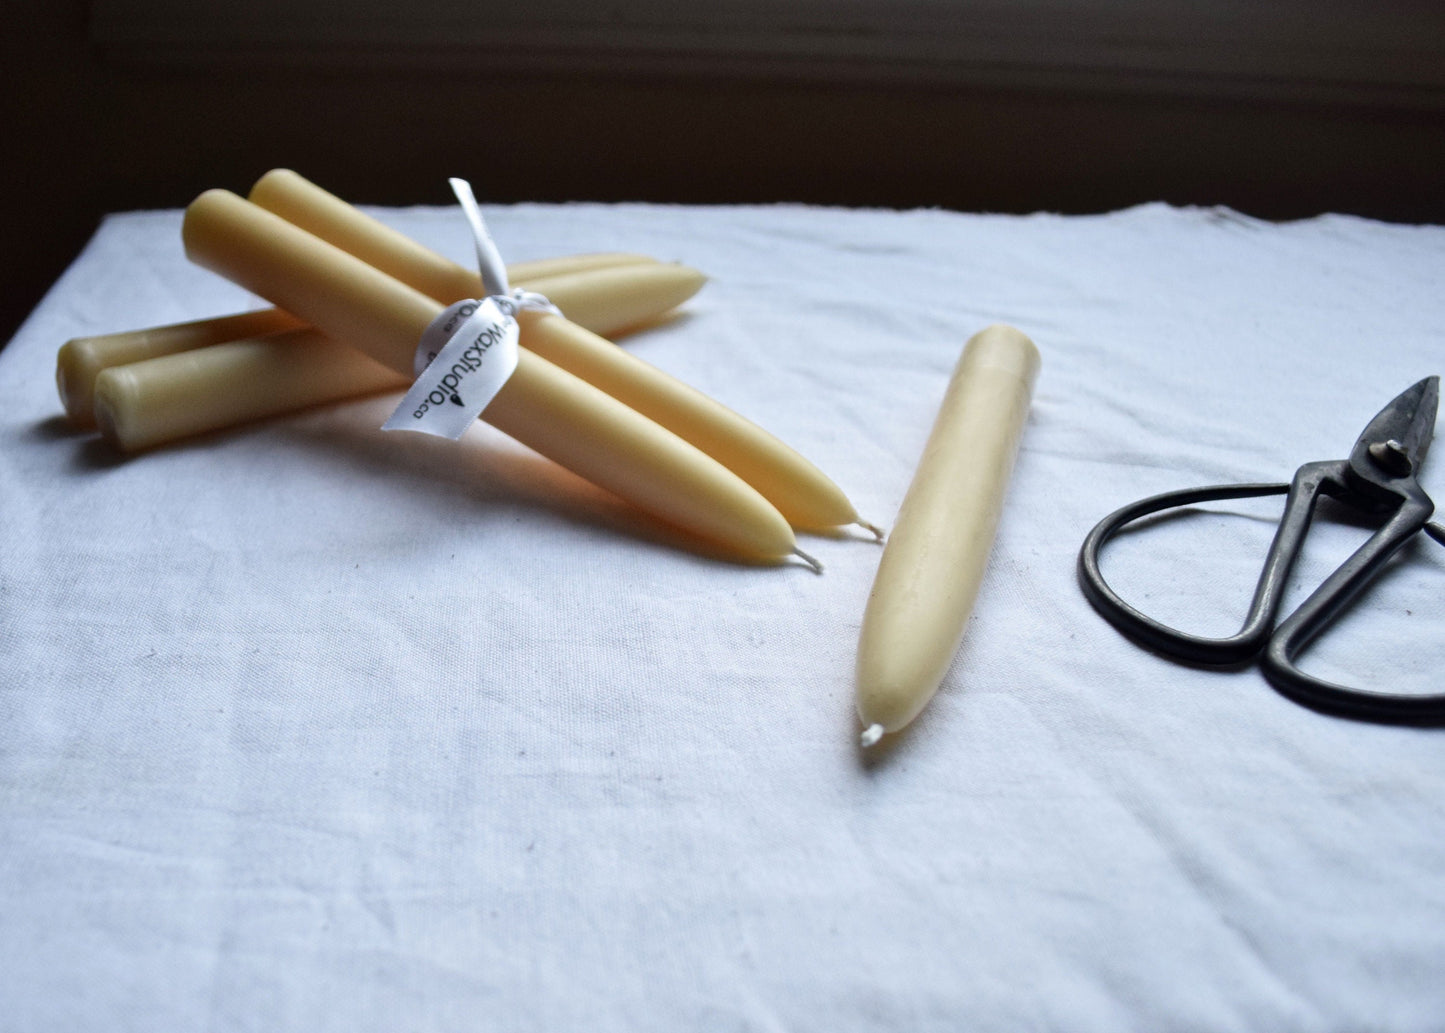 Cream Beeswax Tapers 8" PAIR of 2 / Ivory, Beeswax, Tapers, Candles, Taper Candles, Beeswax Candles